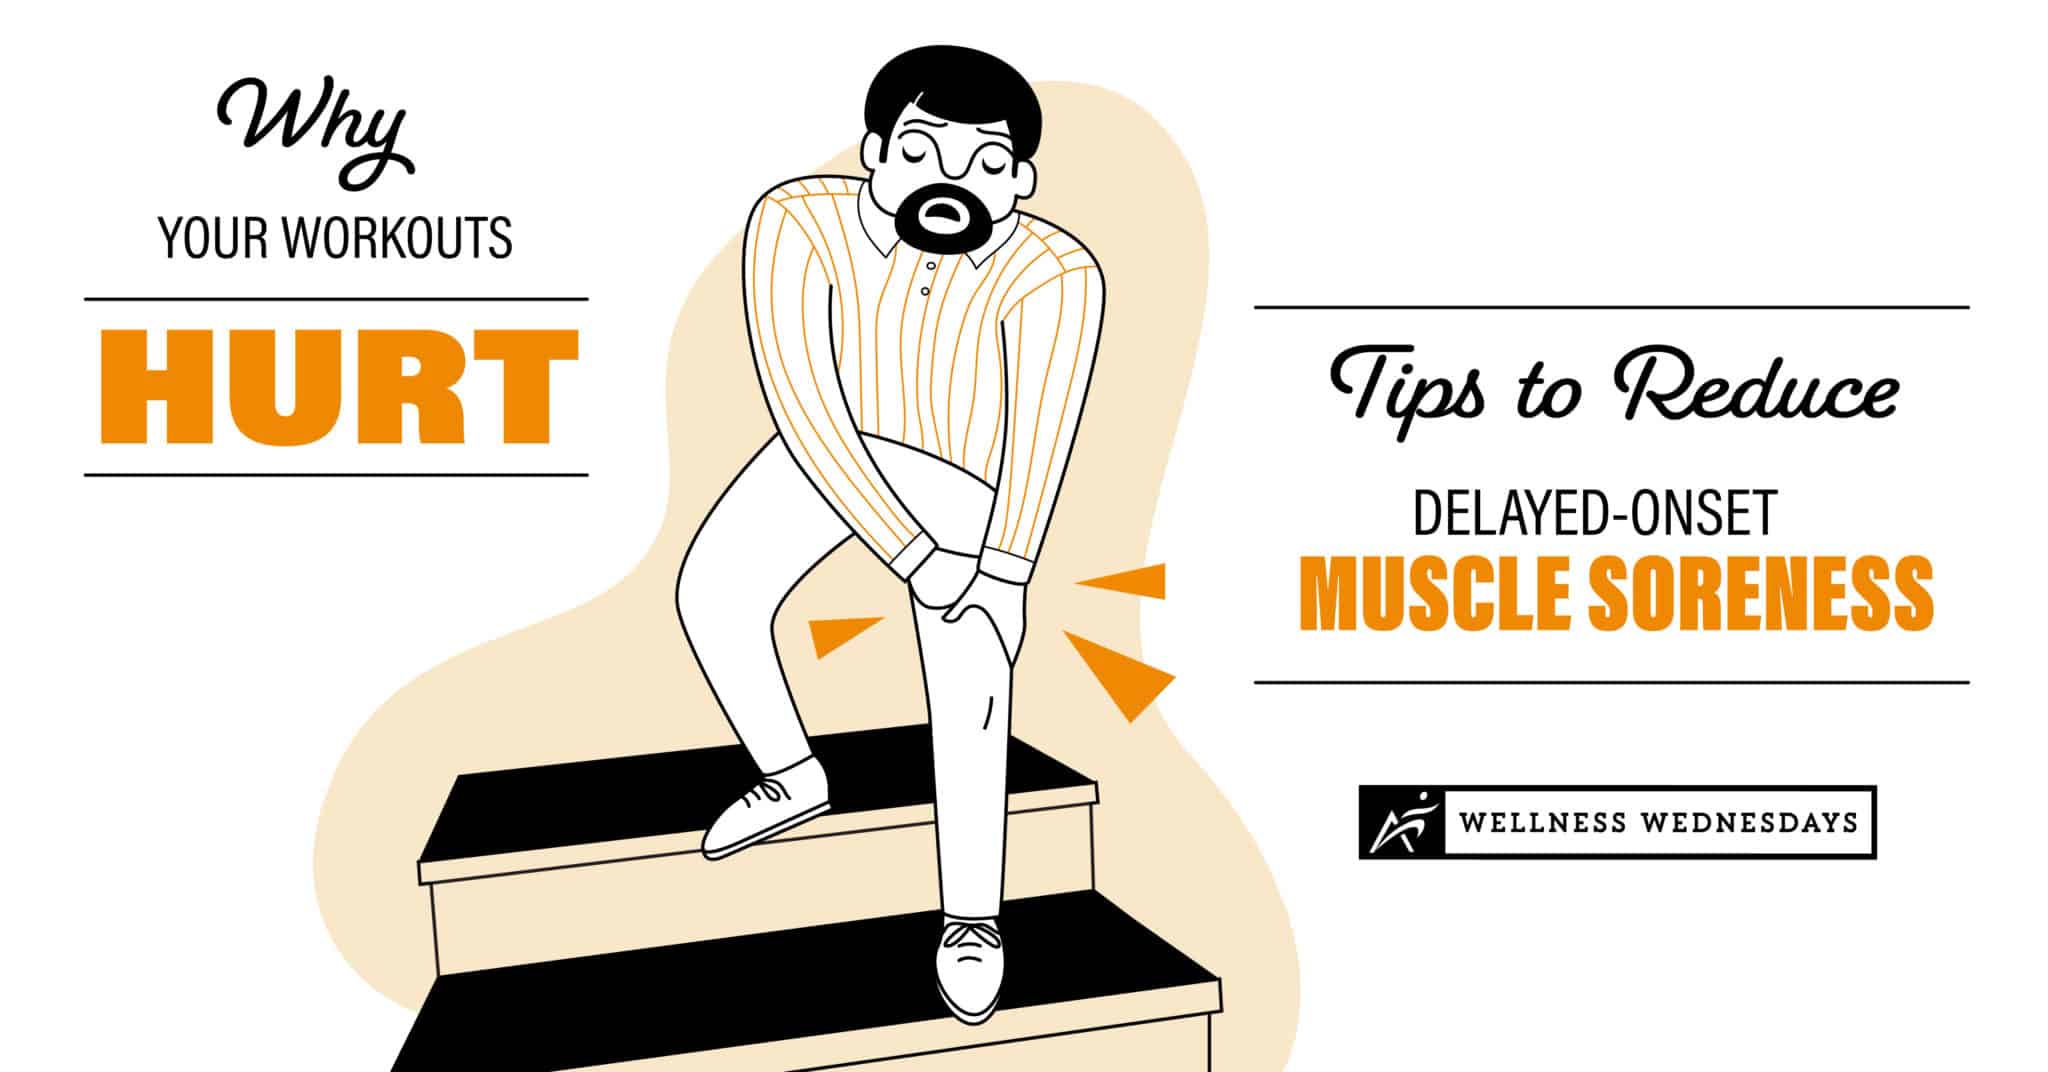 2021_01_Why Your Workouts Hurt Tips to Reduce Delayed Onset Muscle Soreness_FB_Graphic_326520